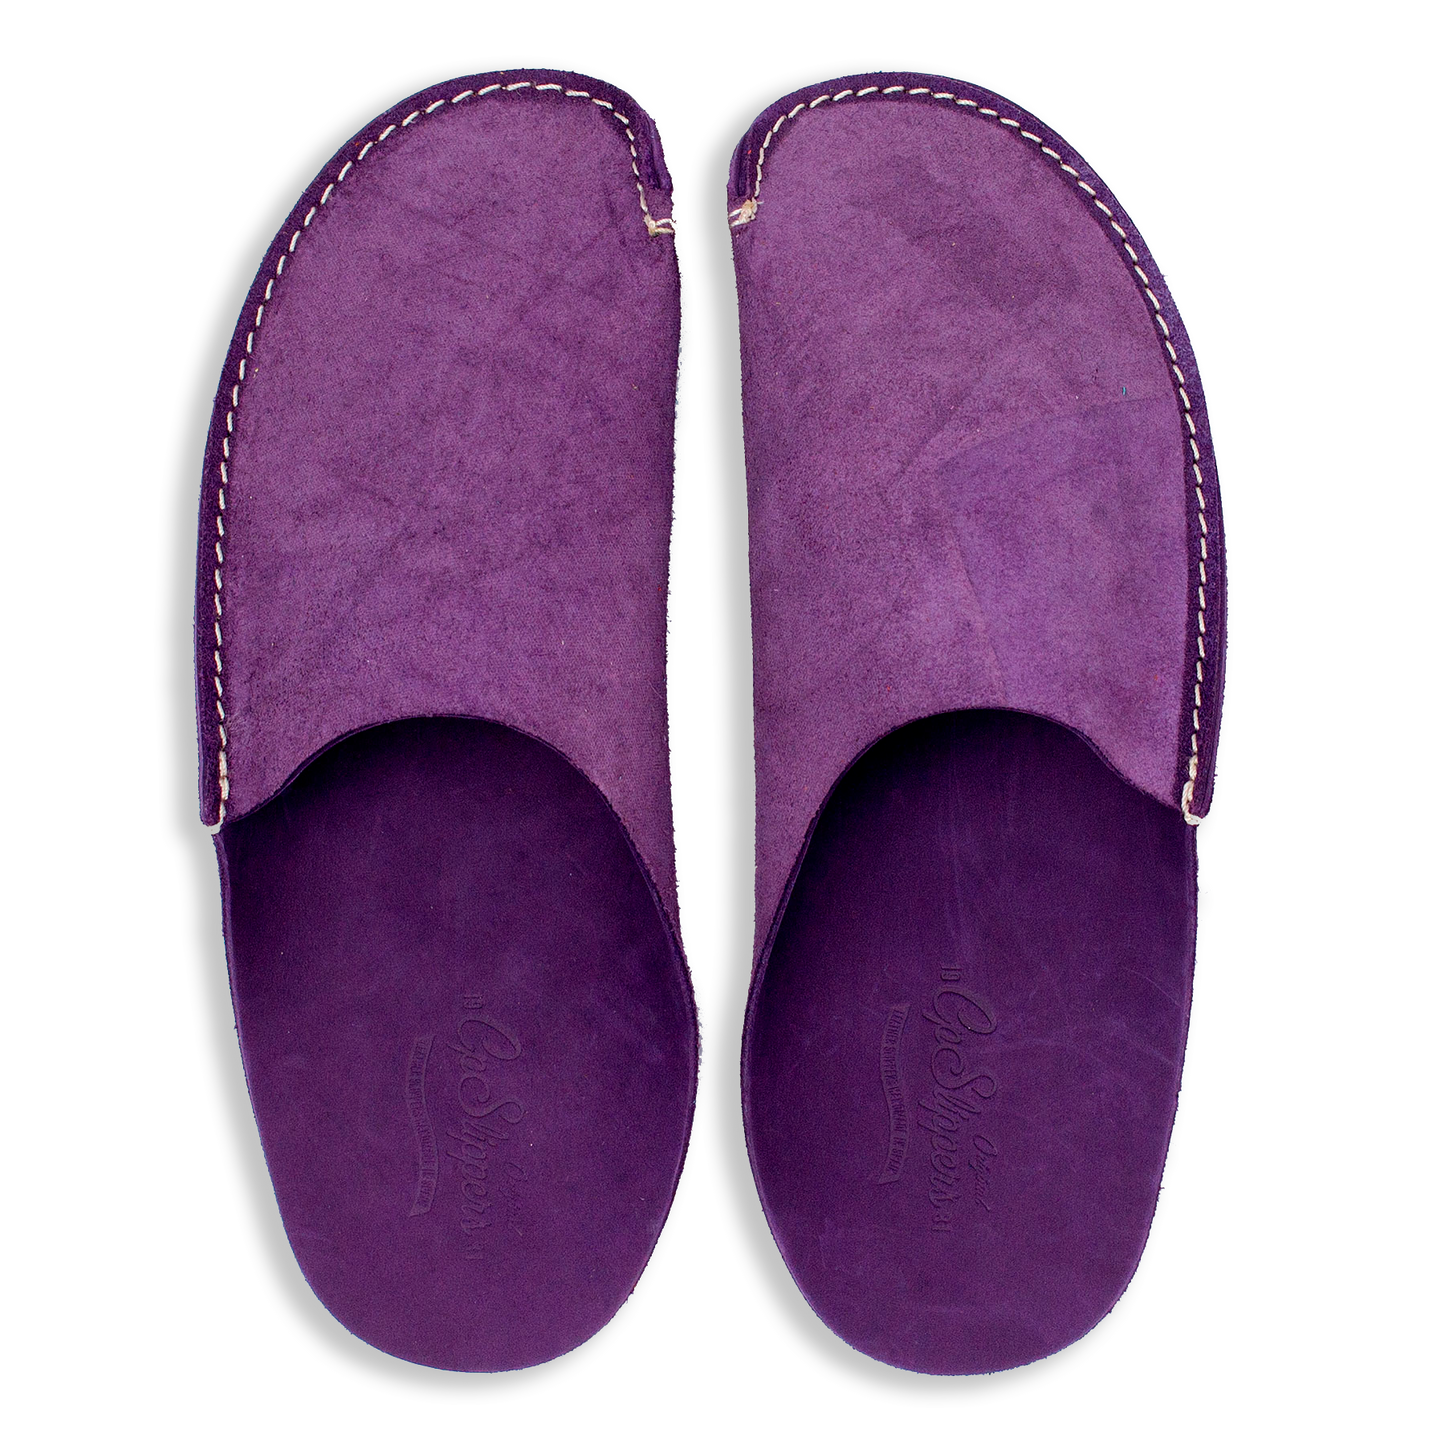 Violet leather CP Slippers home shoes for men and women